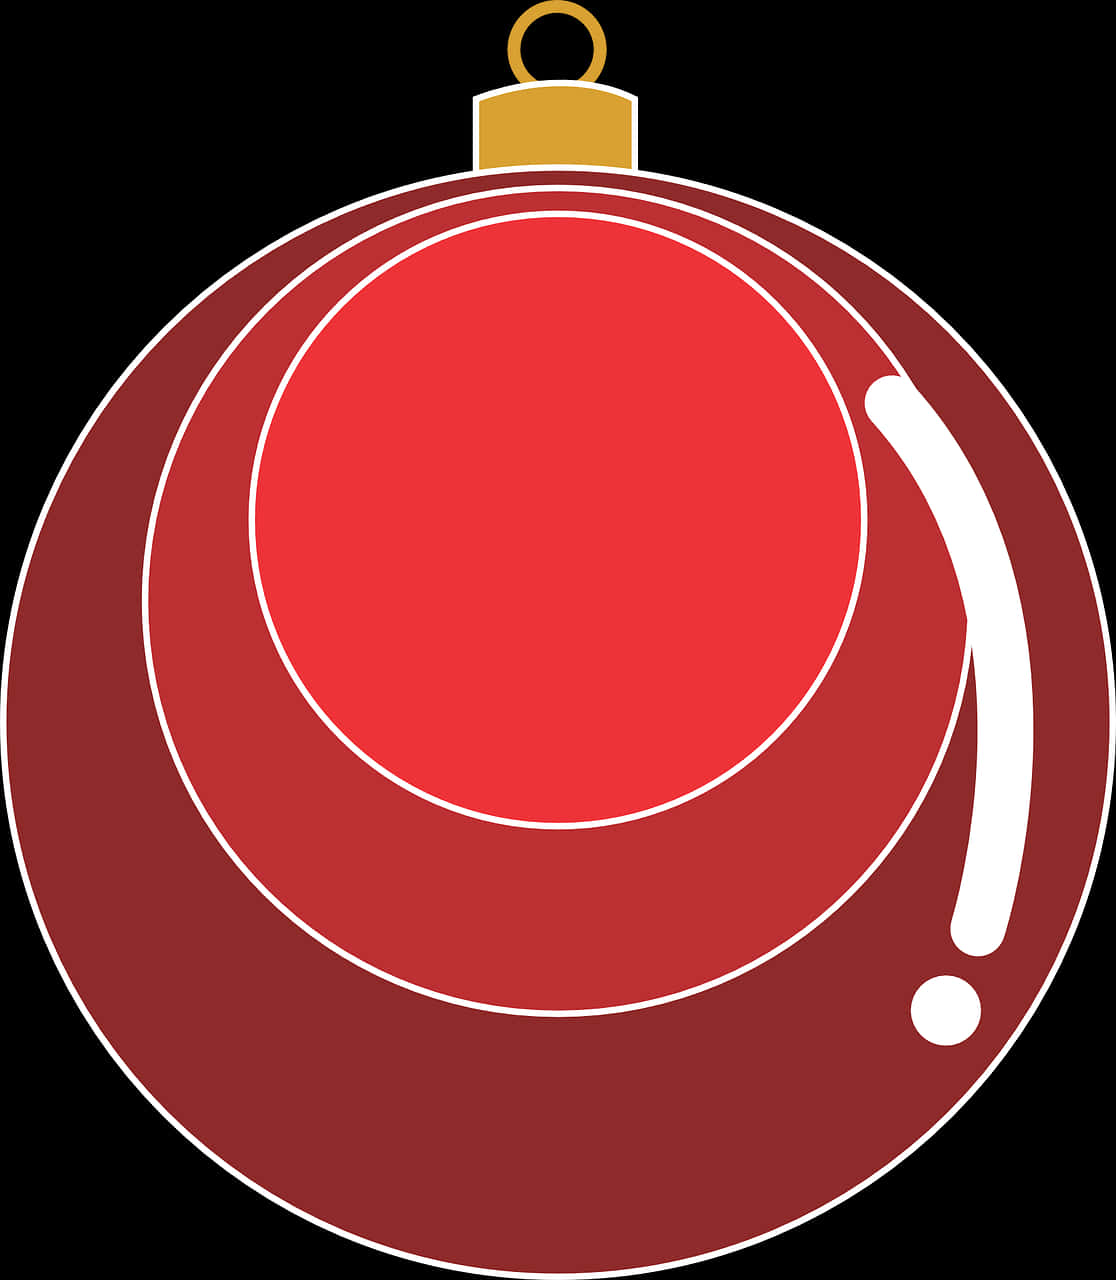 A Red And White Christmas Ornament